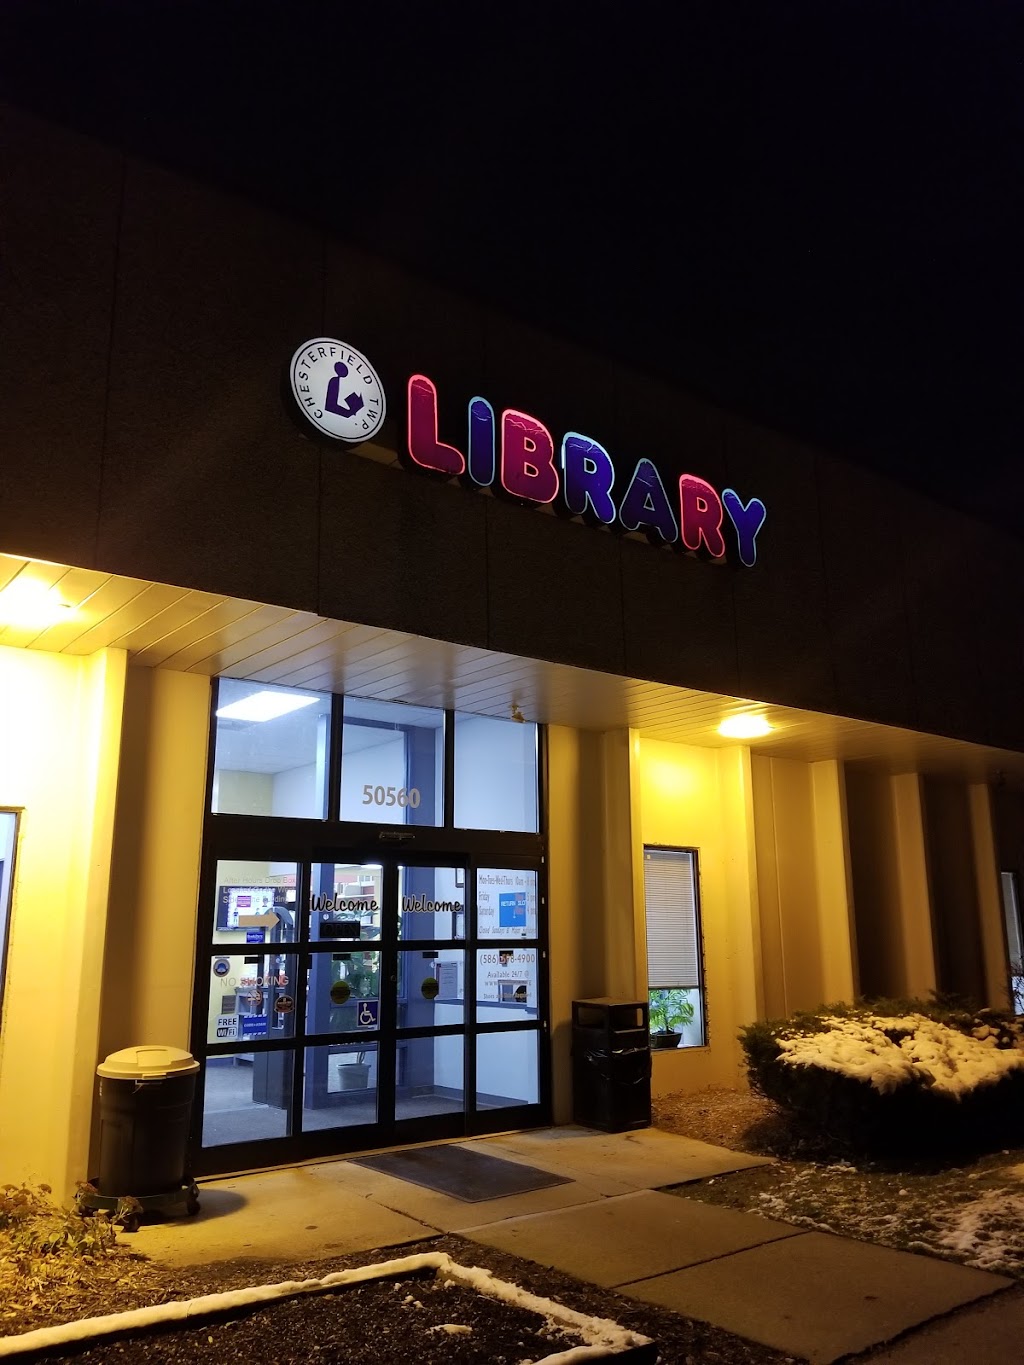 Chesterfield Township Library | 50560 Patricia St, New Baltimore, MI 48051 | Phone: (586) 598-4900